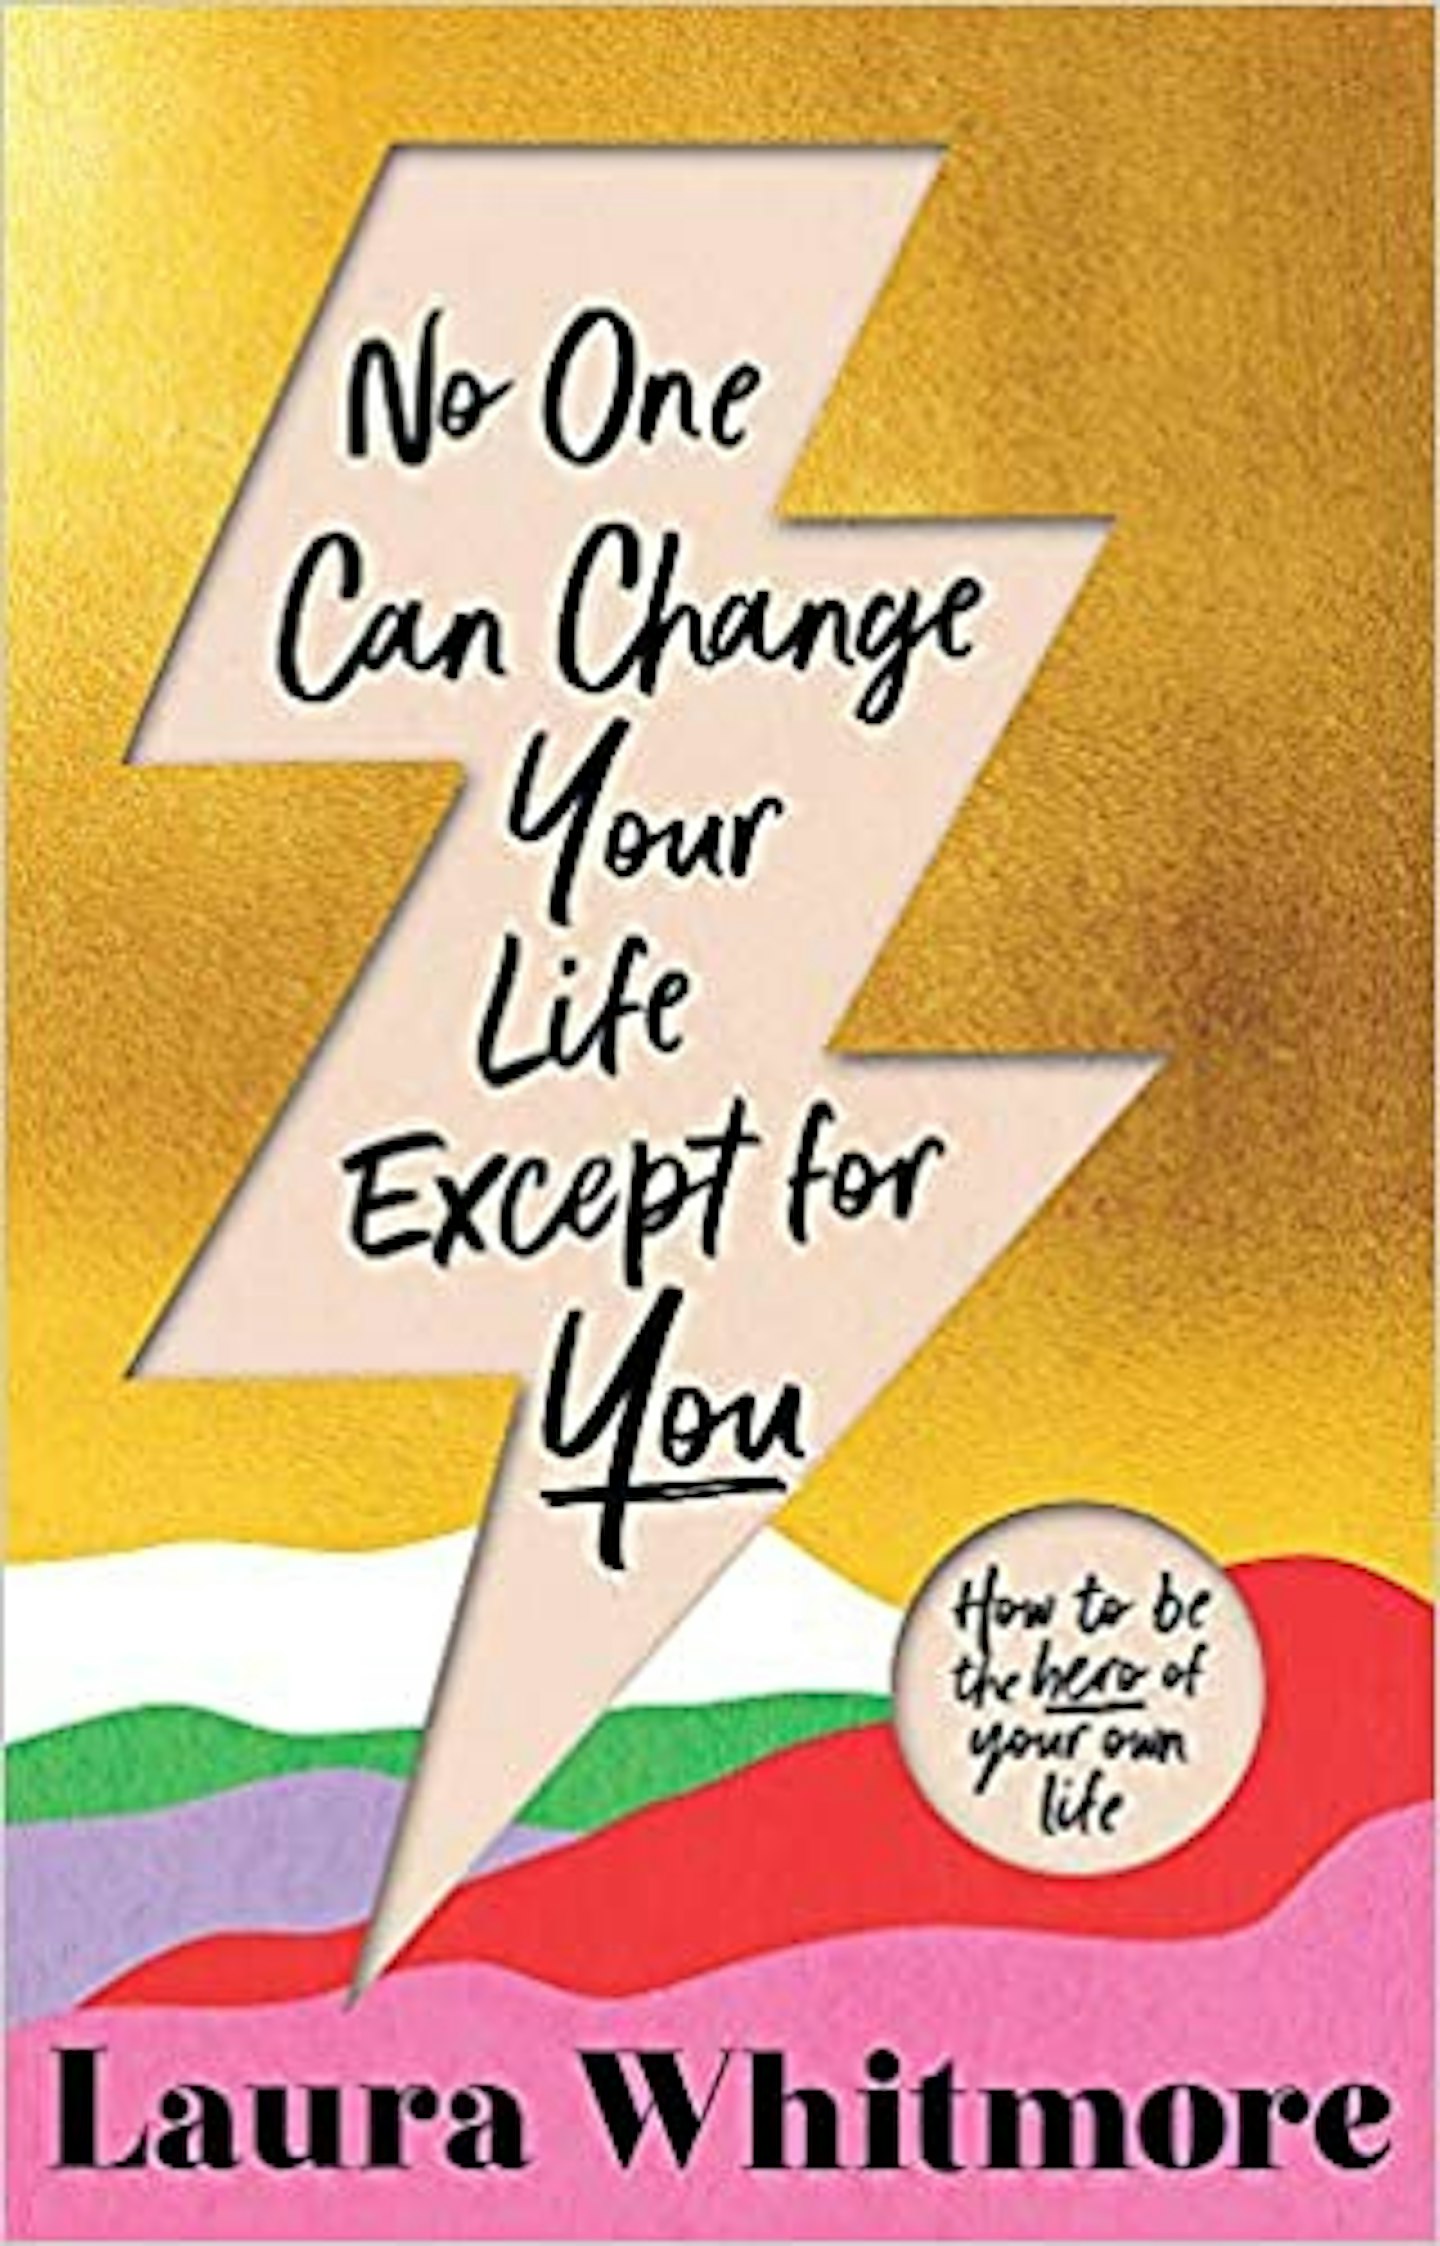 No One Can Change Your Life Except For You, by Laura Whitmore